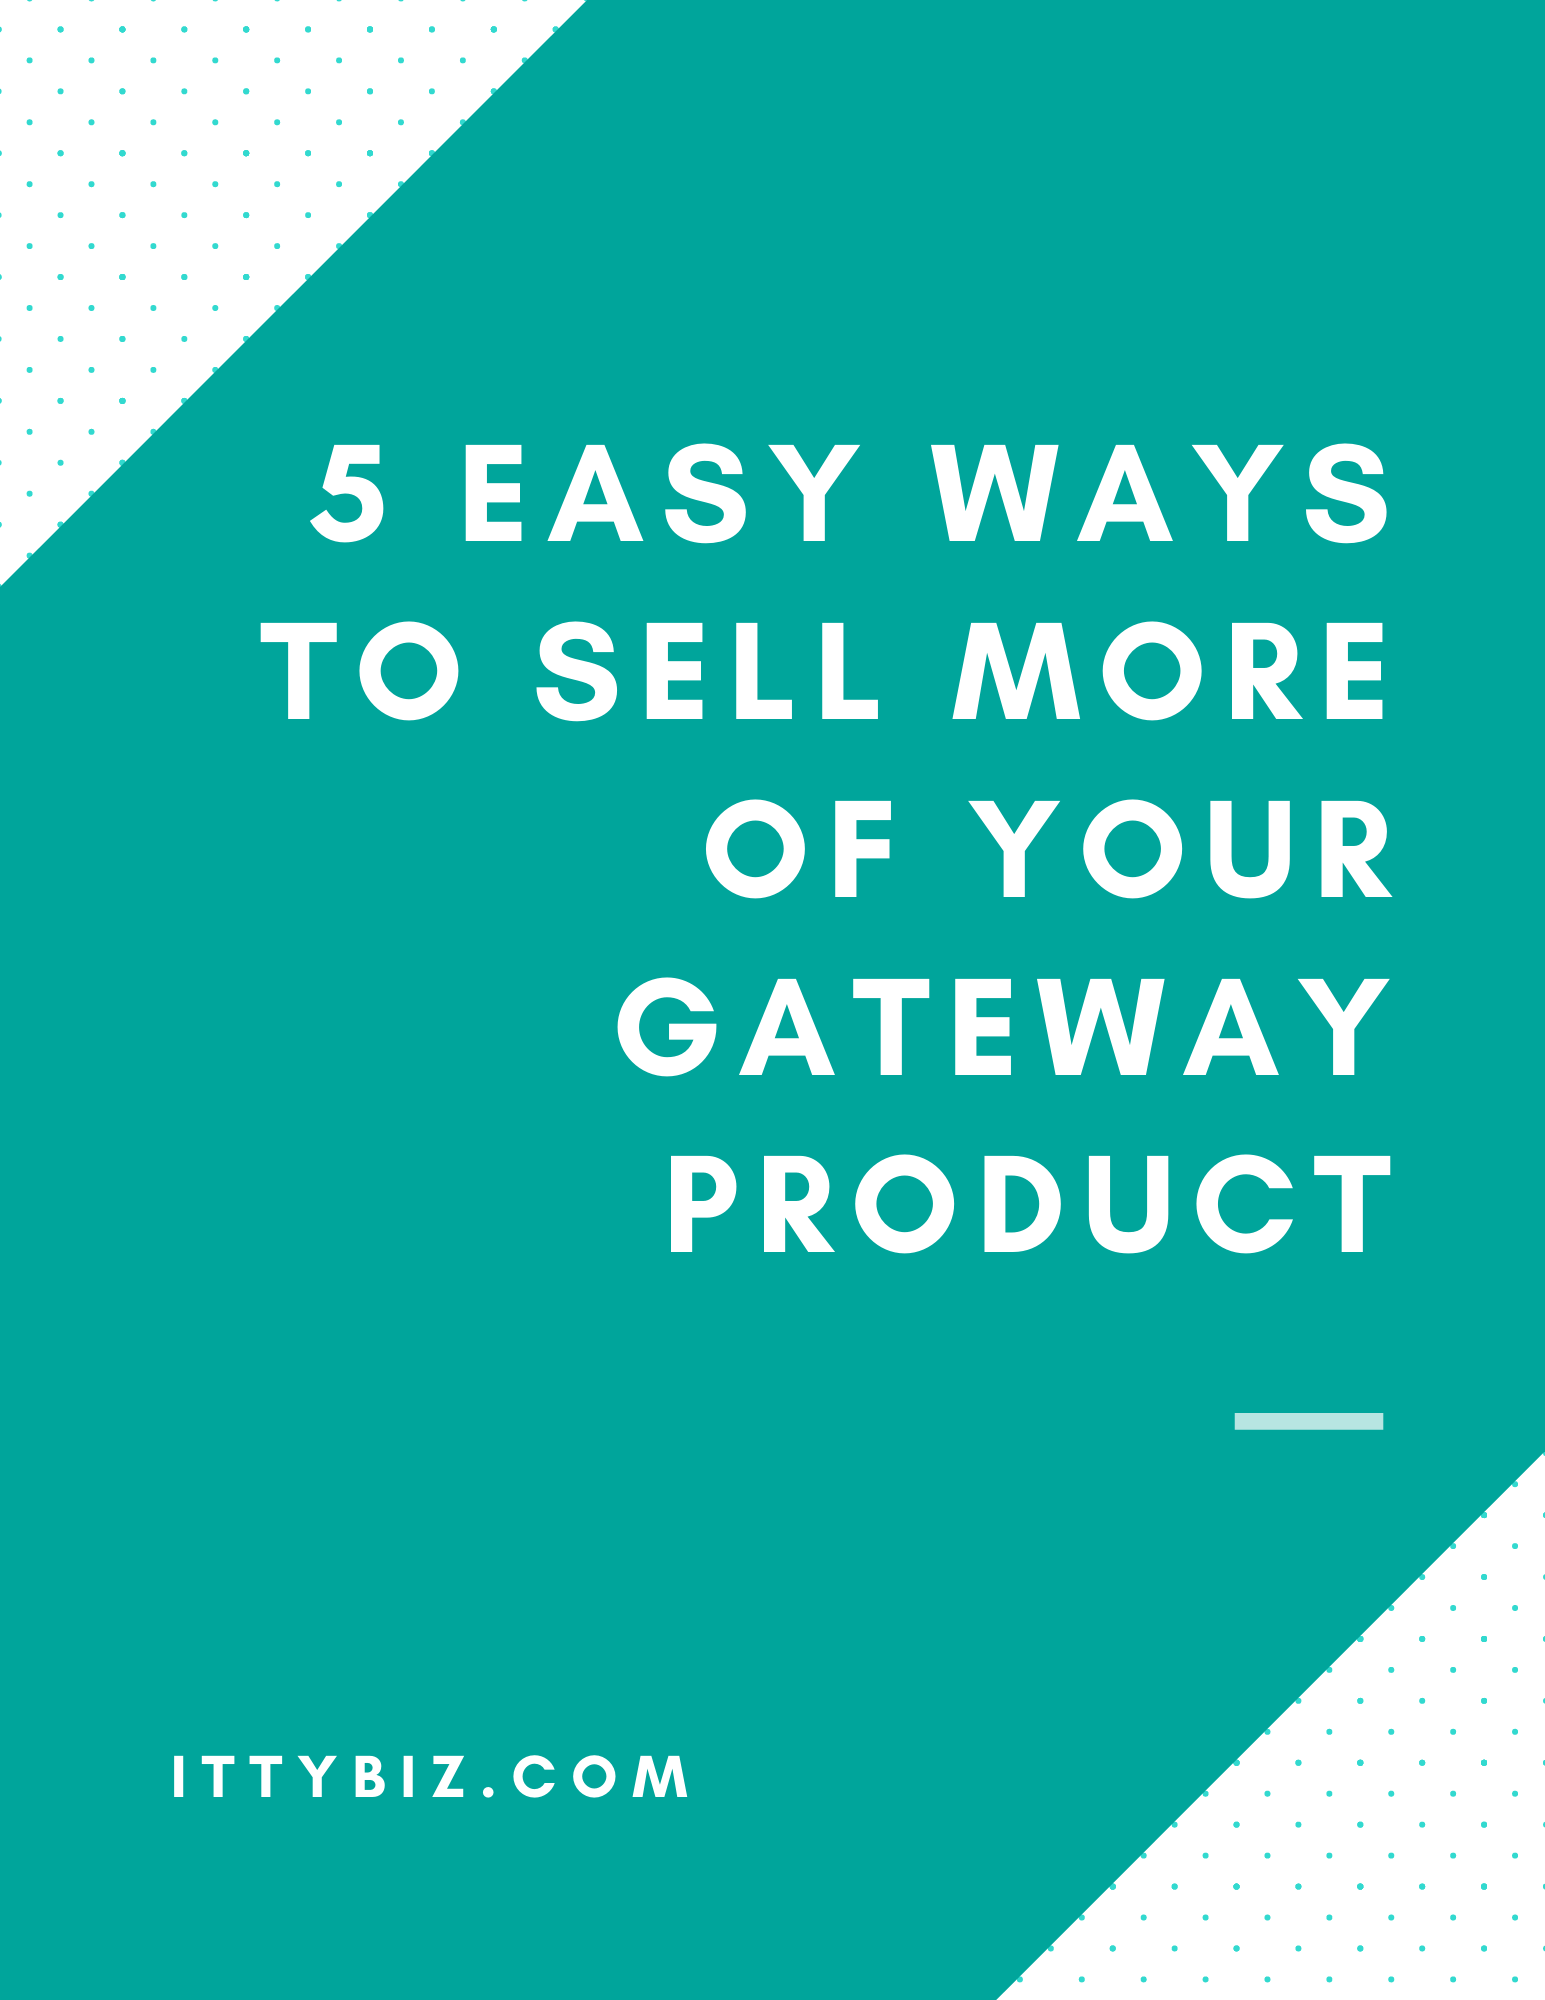 5 Easy Ways To Sell More Of Your Gateway Product